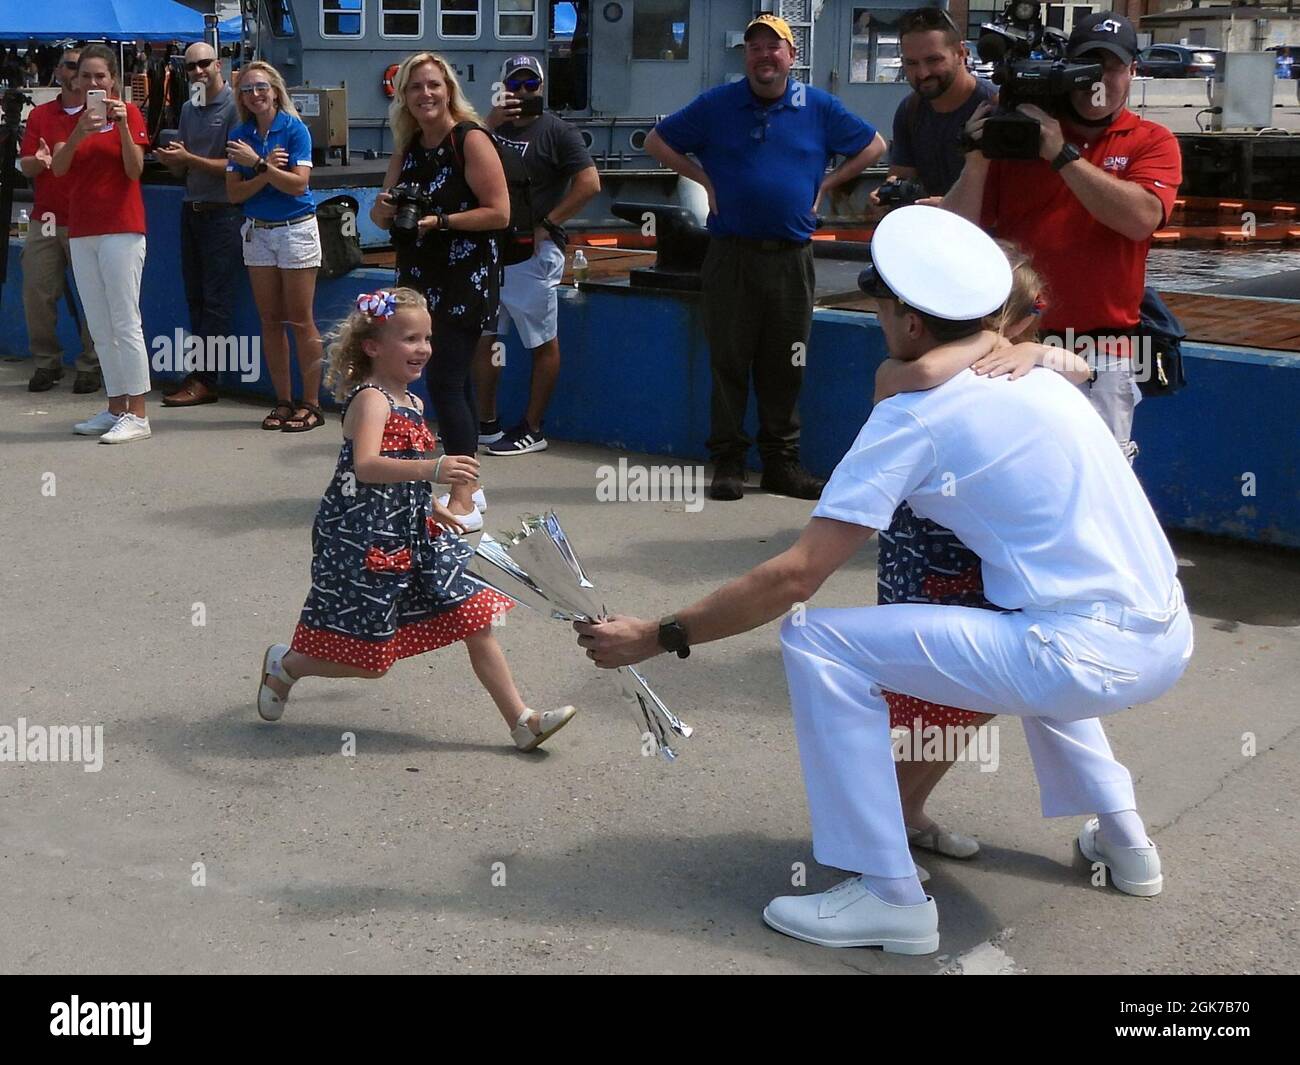 210824-N-AY957-070 GROTON, Conn. (August 24, 2021) – A child runs to hug her father, Chief Petty Officer David Begley, a nuclear machinist’s mate from the Los Angeles-class submarine USS San Juan (SSN 751), during a homecoming event at Naval Submarine Base New London in Groton, Conn., Aug. 24. San Juan and crew, operating under Submarine Squadron (SUBRON) TWELVE, returned to homeport from a scheduled seven-month deployment in support of the Navy's maritime strategy of supporting national security interests and maritime security operations. Stock Photo